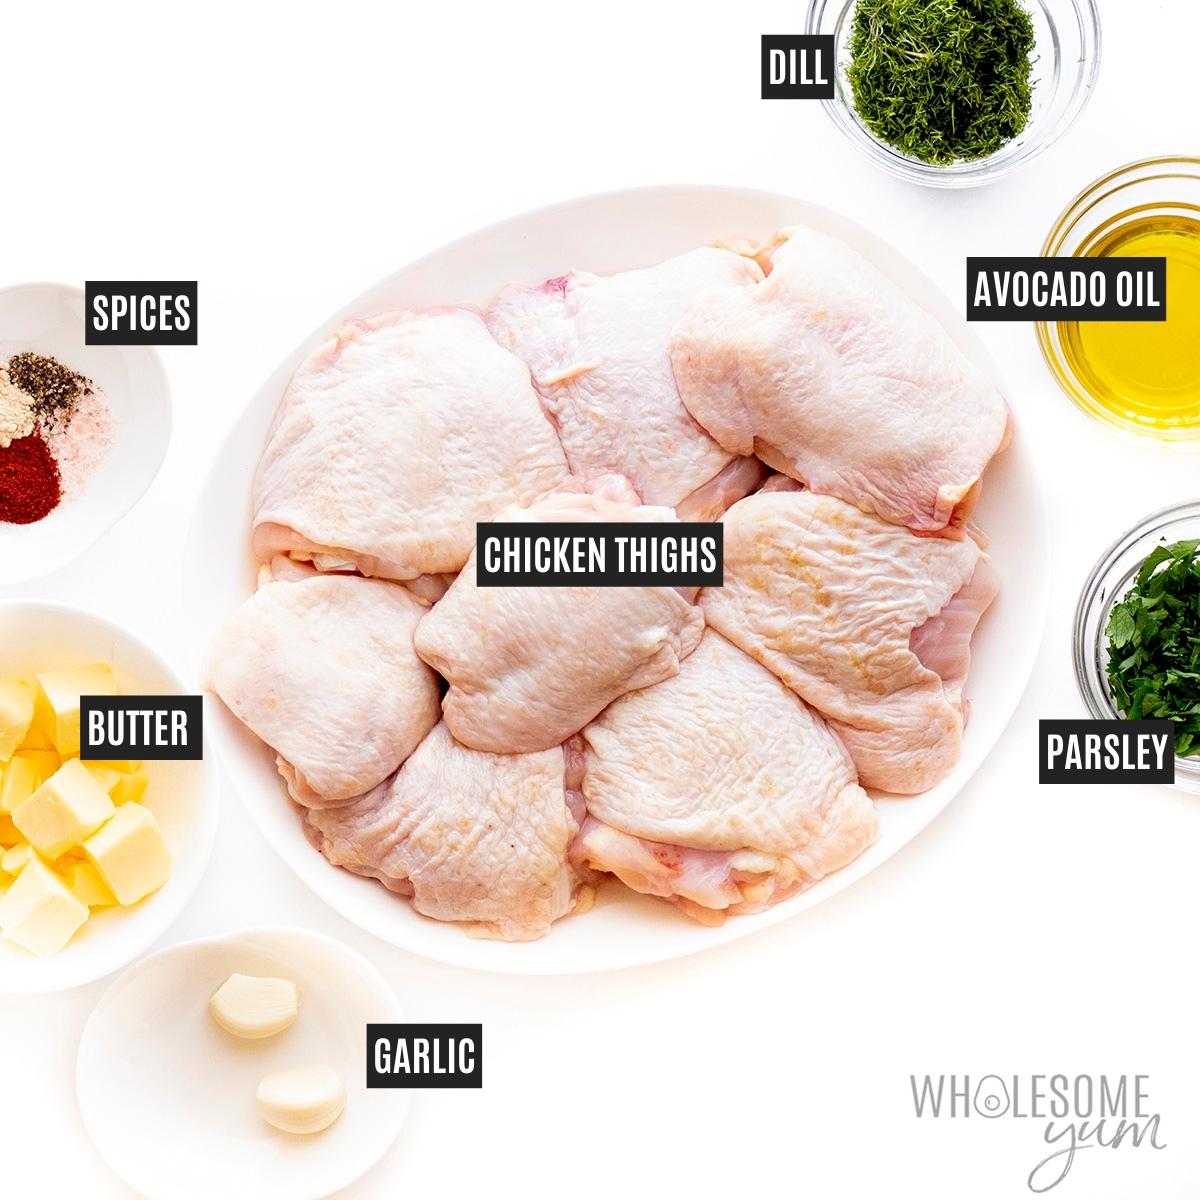 Ingredients for baking chicken thighs.